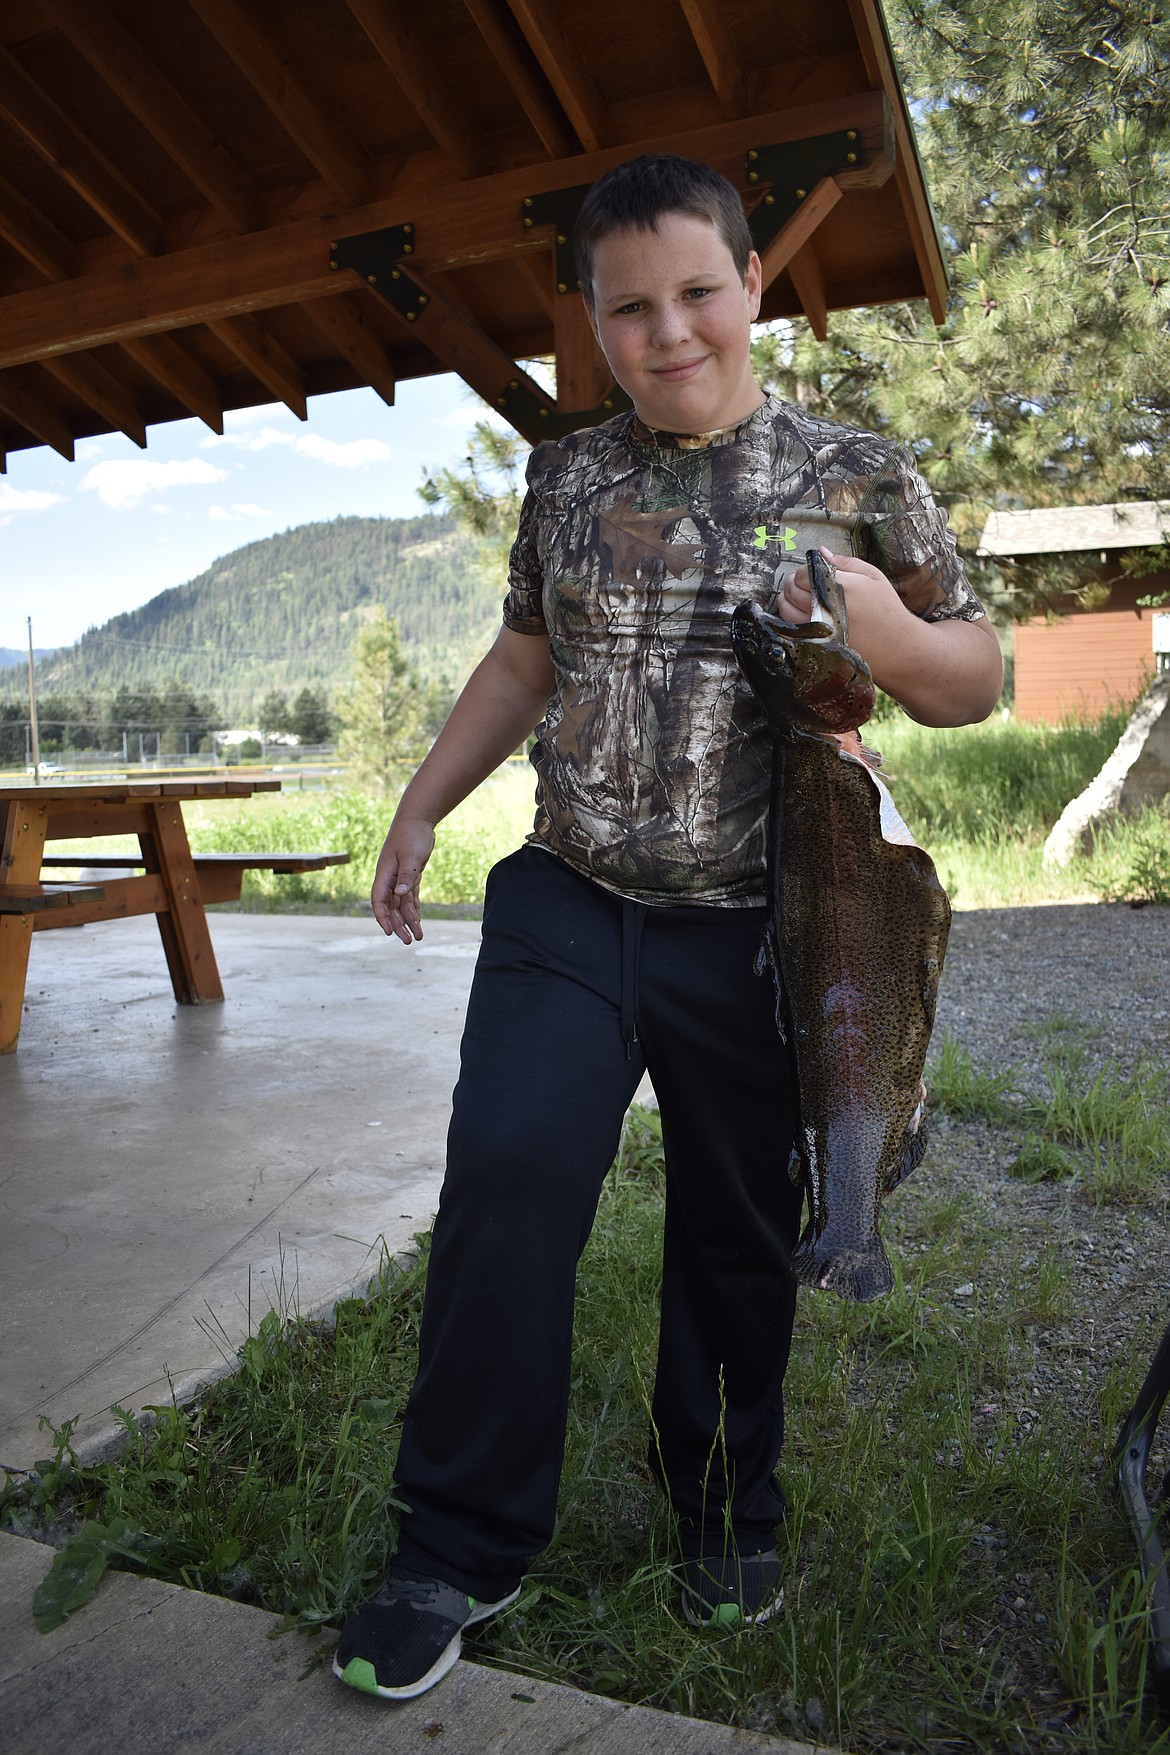 Lucas Peterson of Troy poses with the roughly 8 pound rainbow trout he caught in Roosevelt Park. (Ben Kibbey/The Western News)